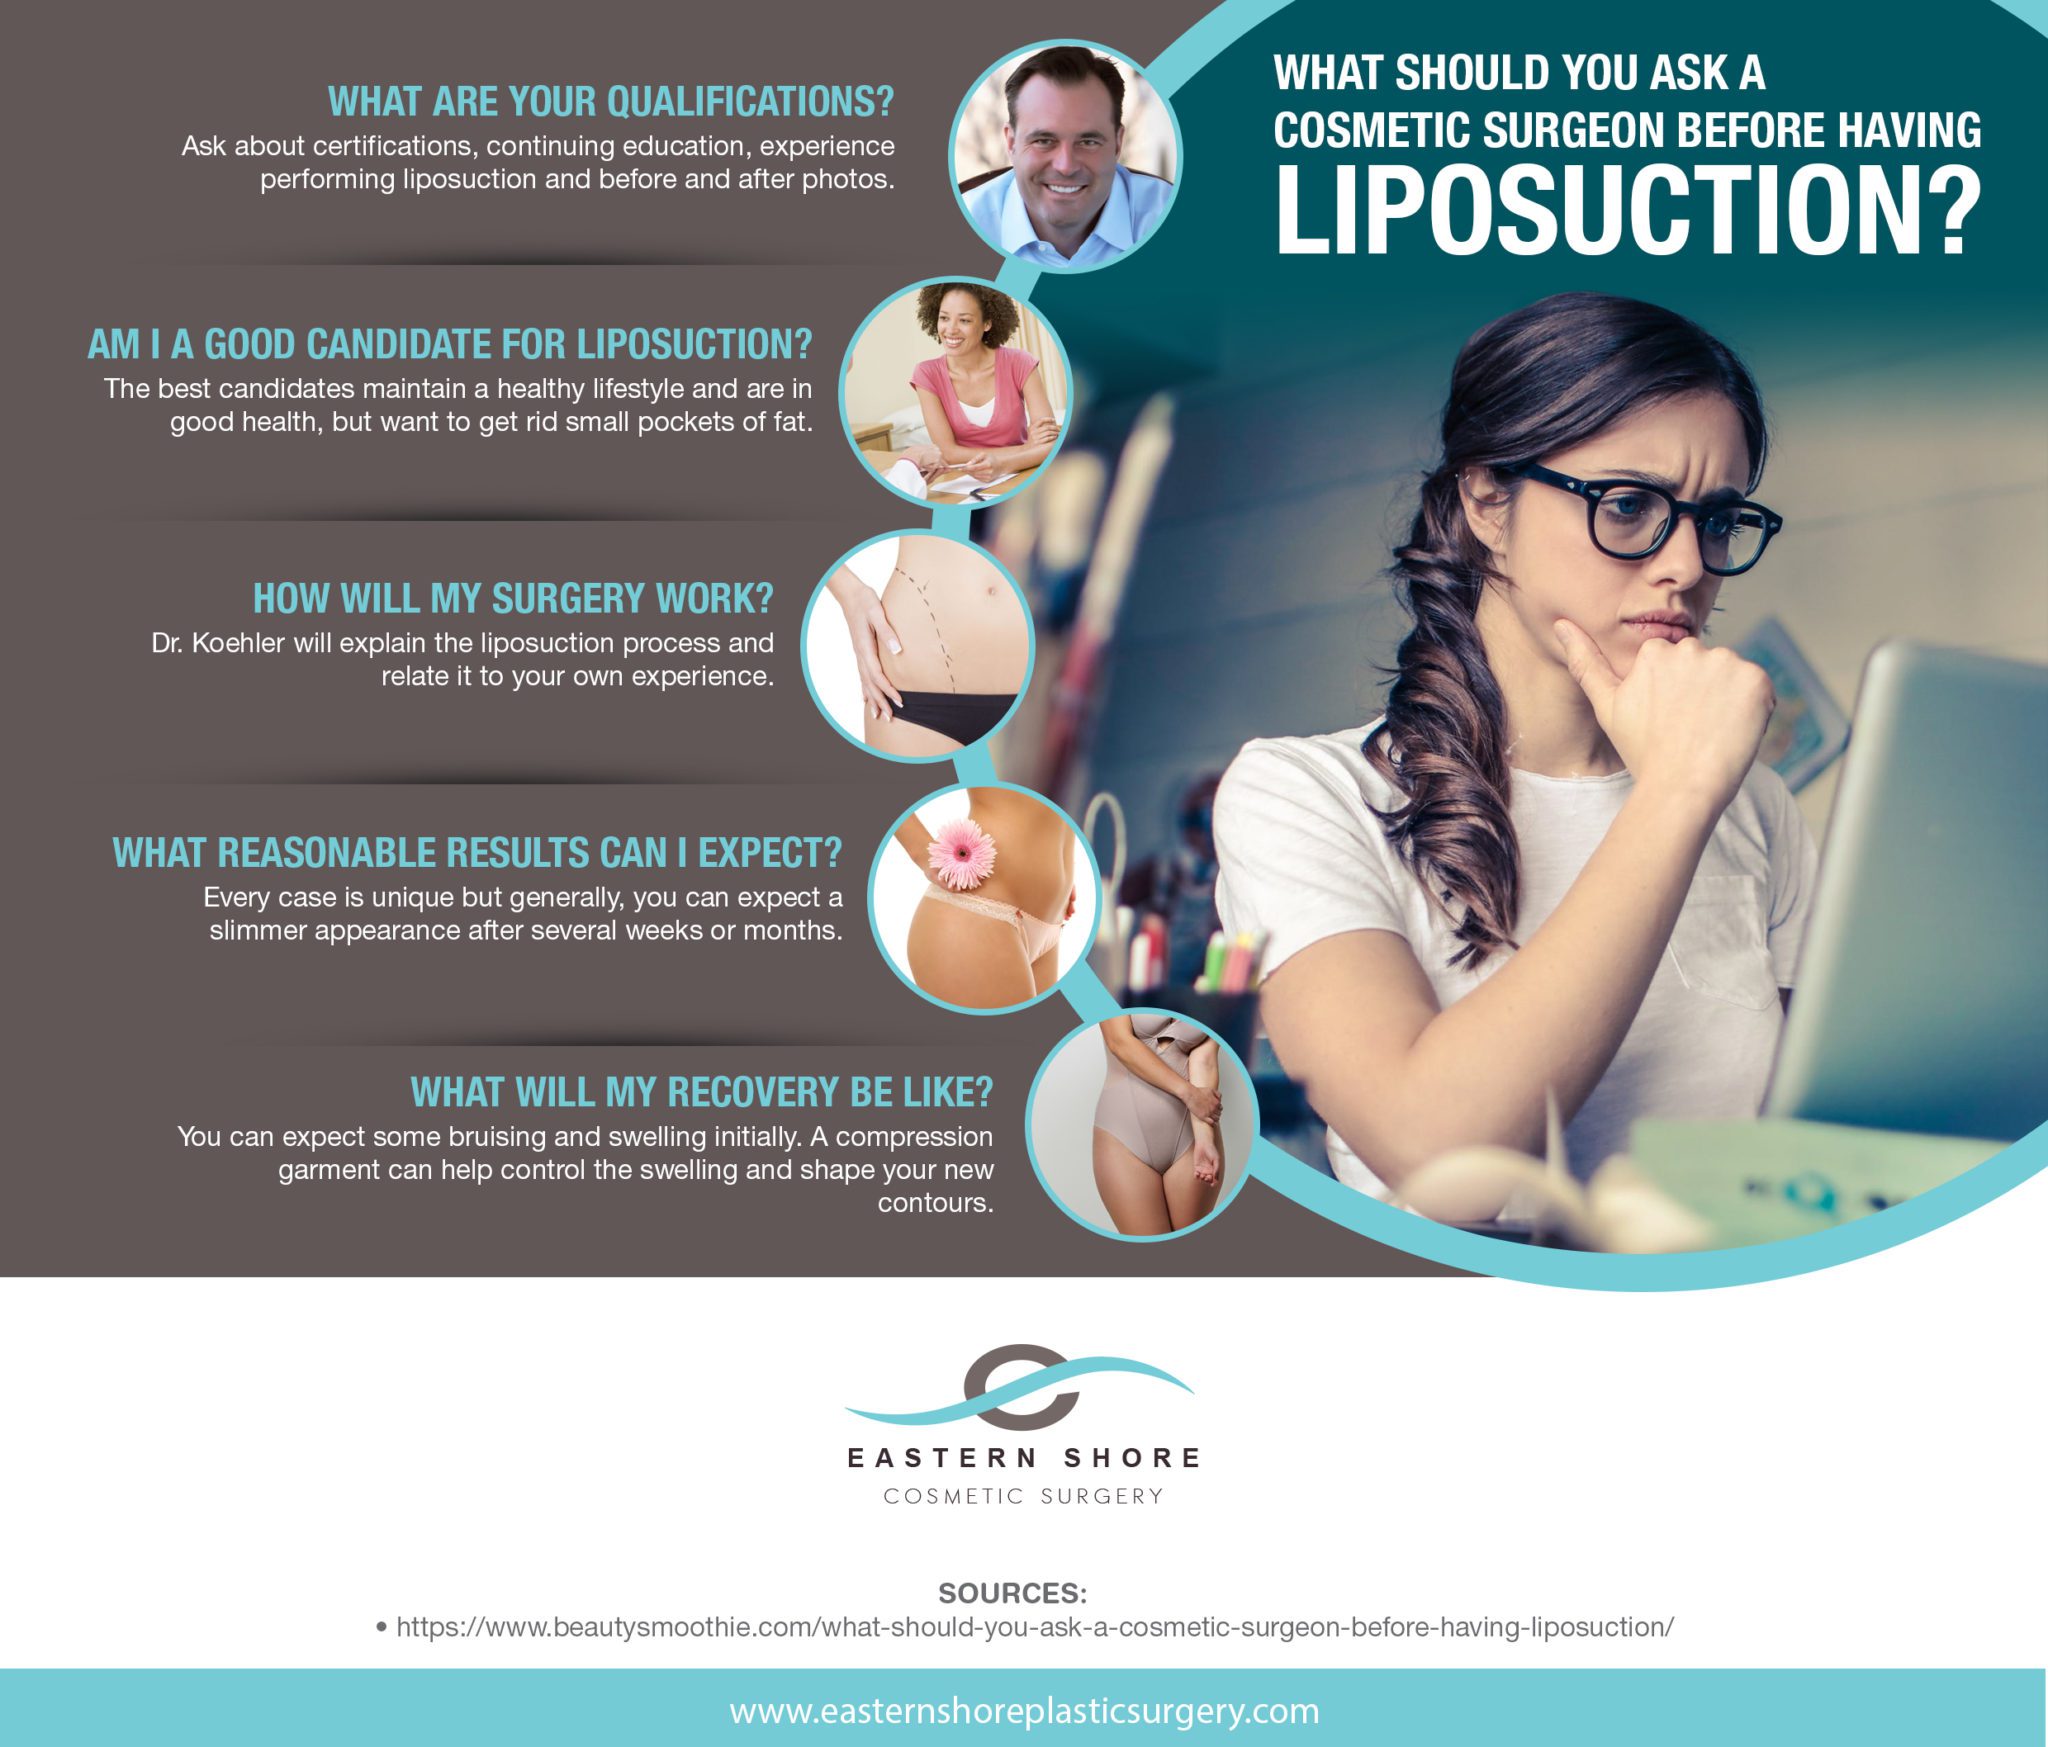 What Should You Ask a Cosmetic Surgeon Before Having Liposuction? [Infographic] img 1